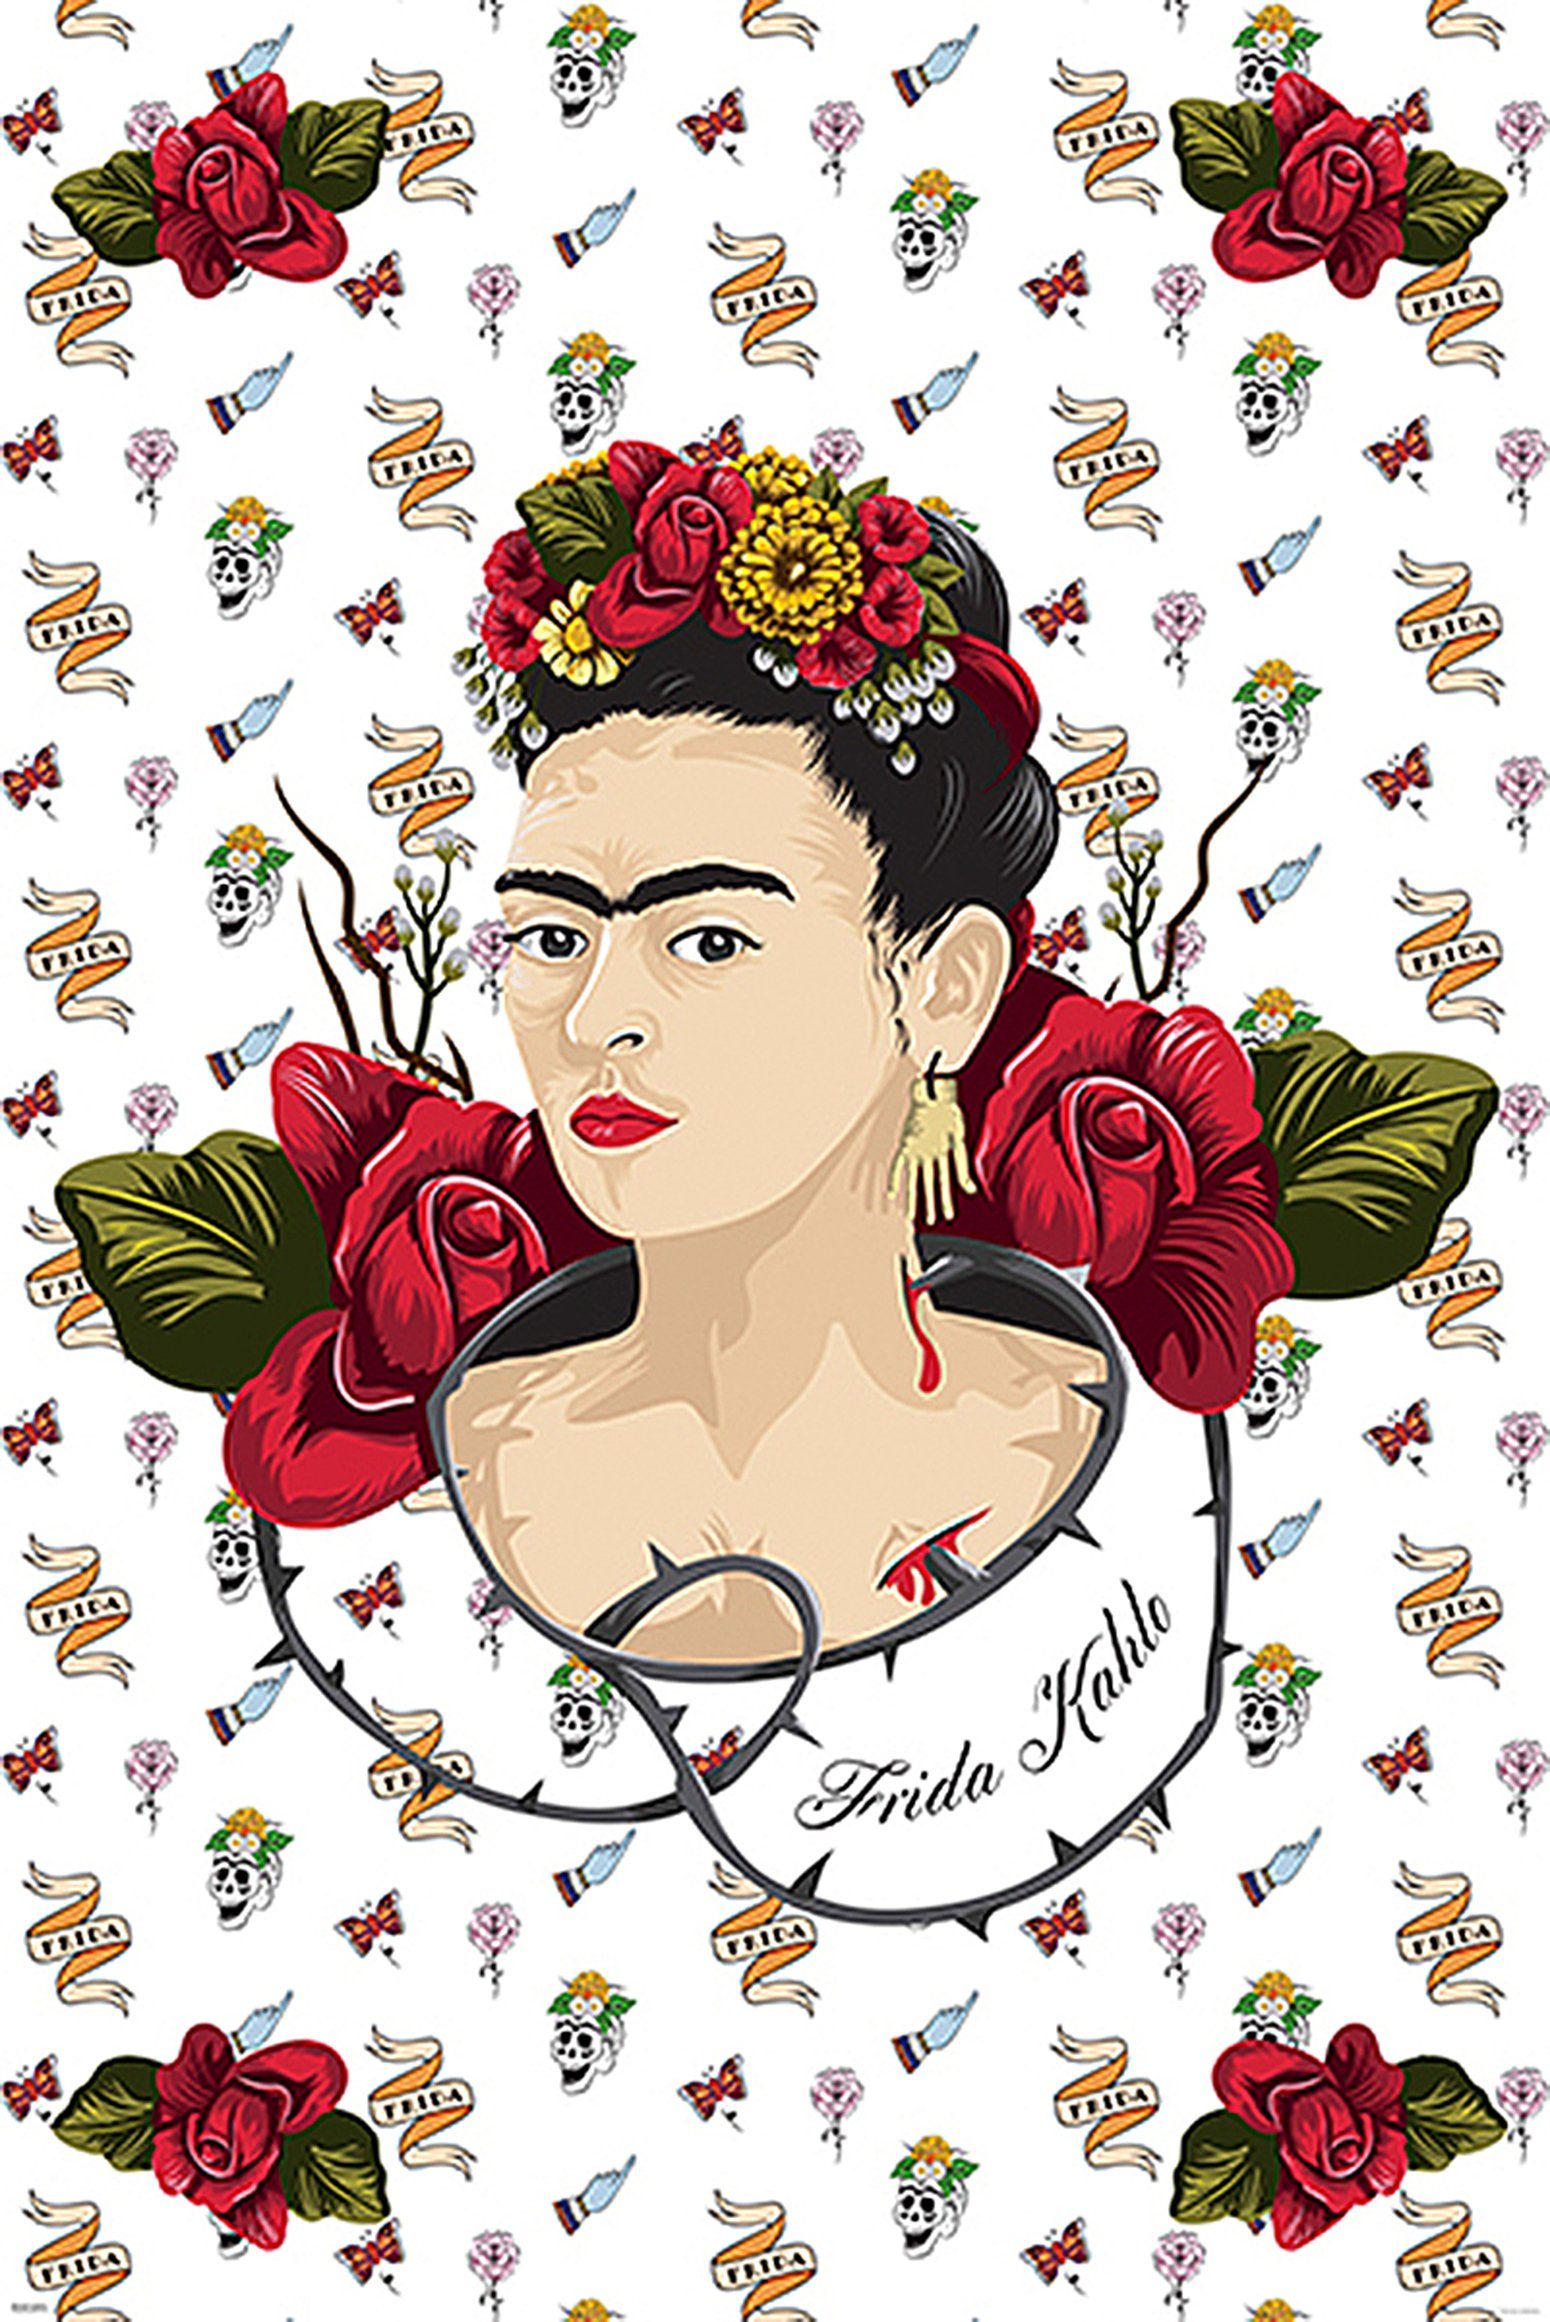 PYRAMID Poster Frida Kahlo Poster Red and White 61 x 91,5 cm